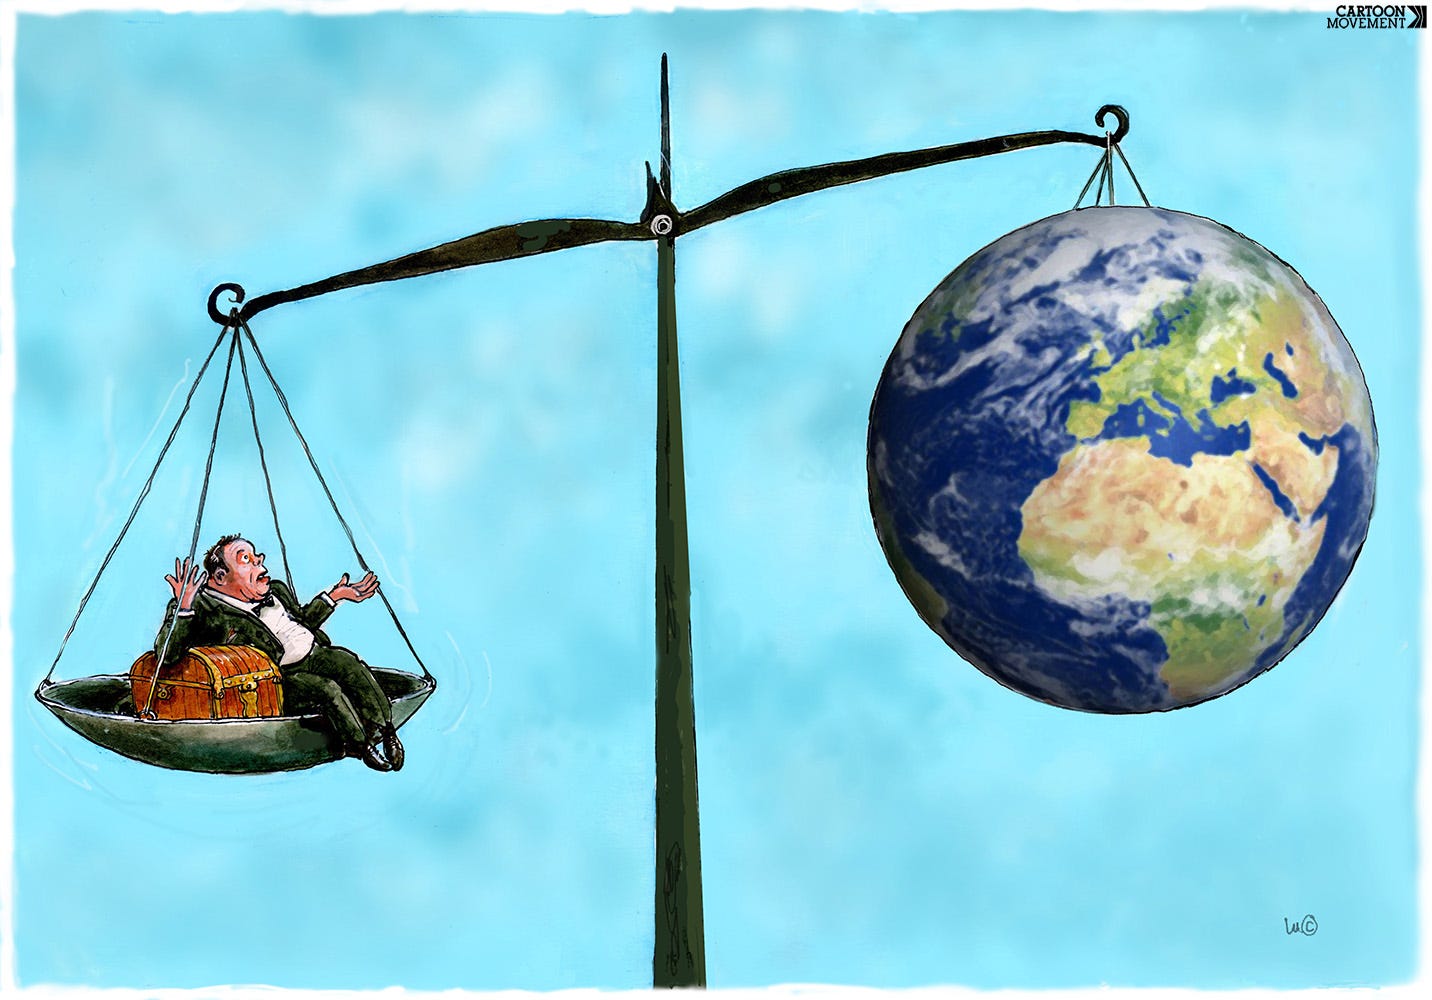 Cartoon showing scales. On the one side, we see a rich man with a treasure chest; on the other, the planet earth. The accumulated wealth of the rich man weighs more than the planet.